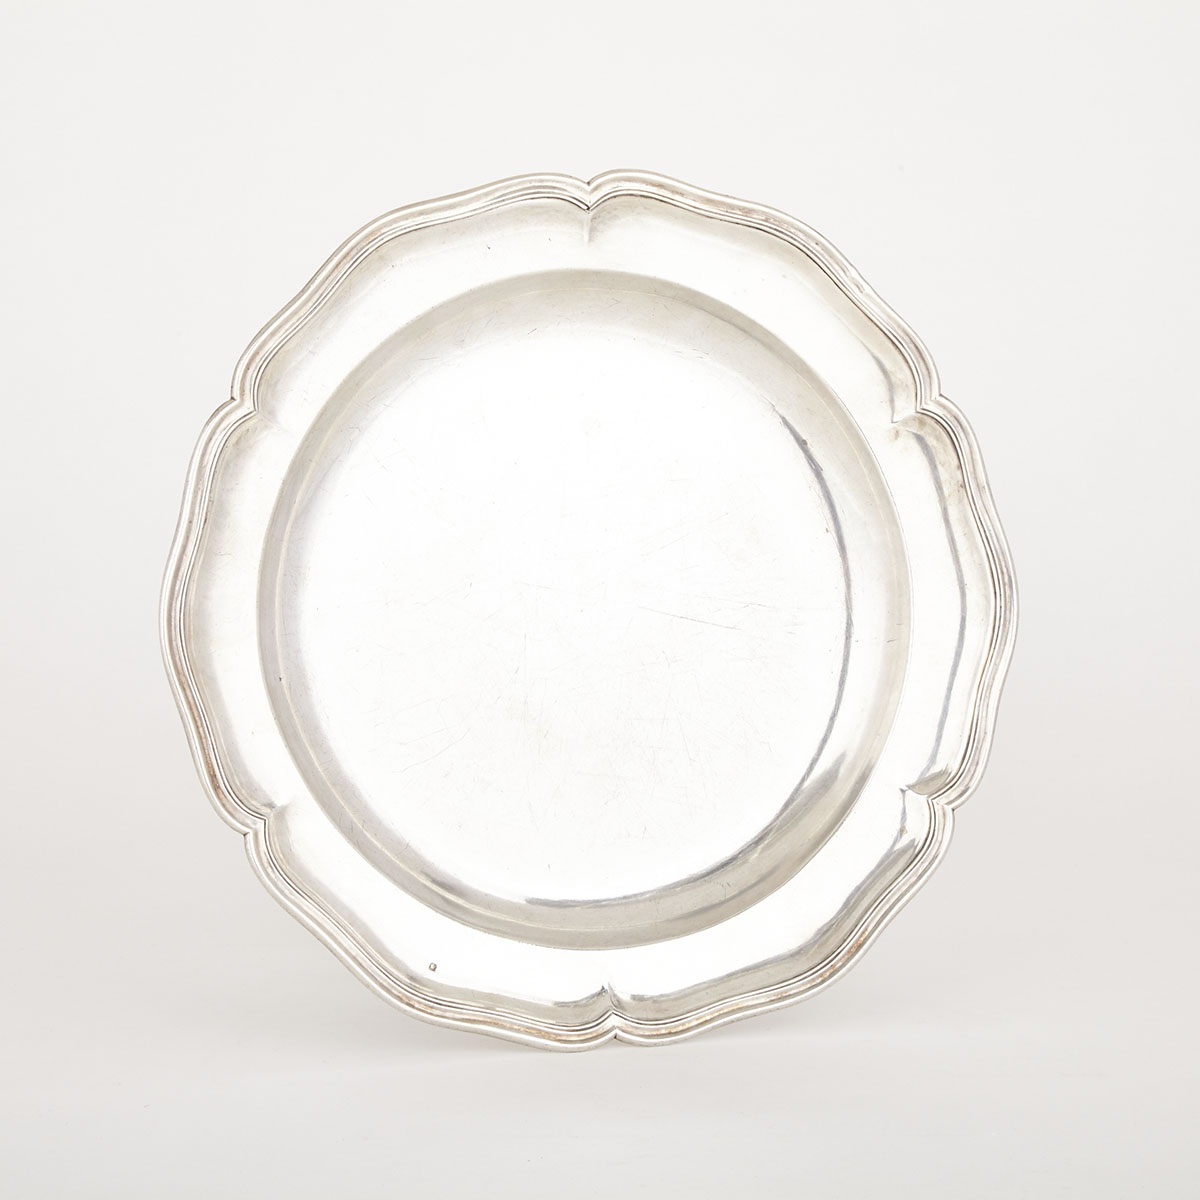 French Silver Large Plate, Ange René Rouviere, Avignon, c.1750